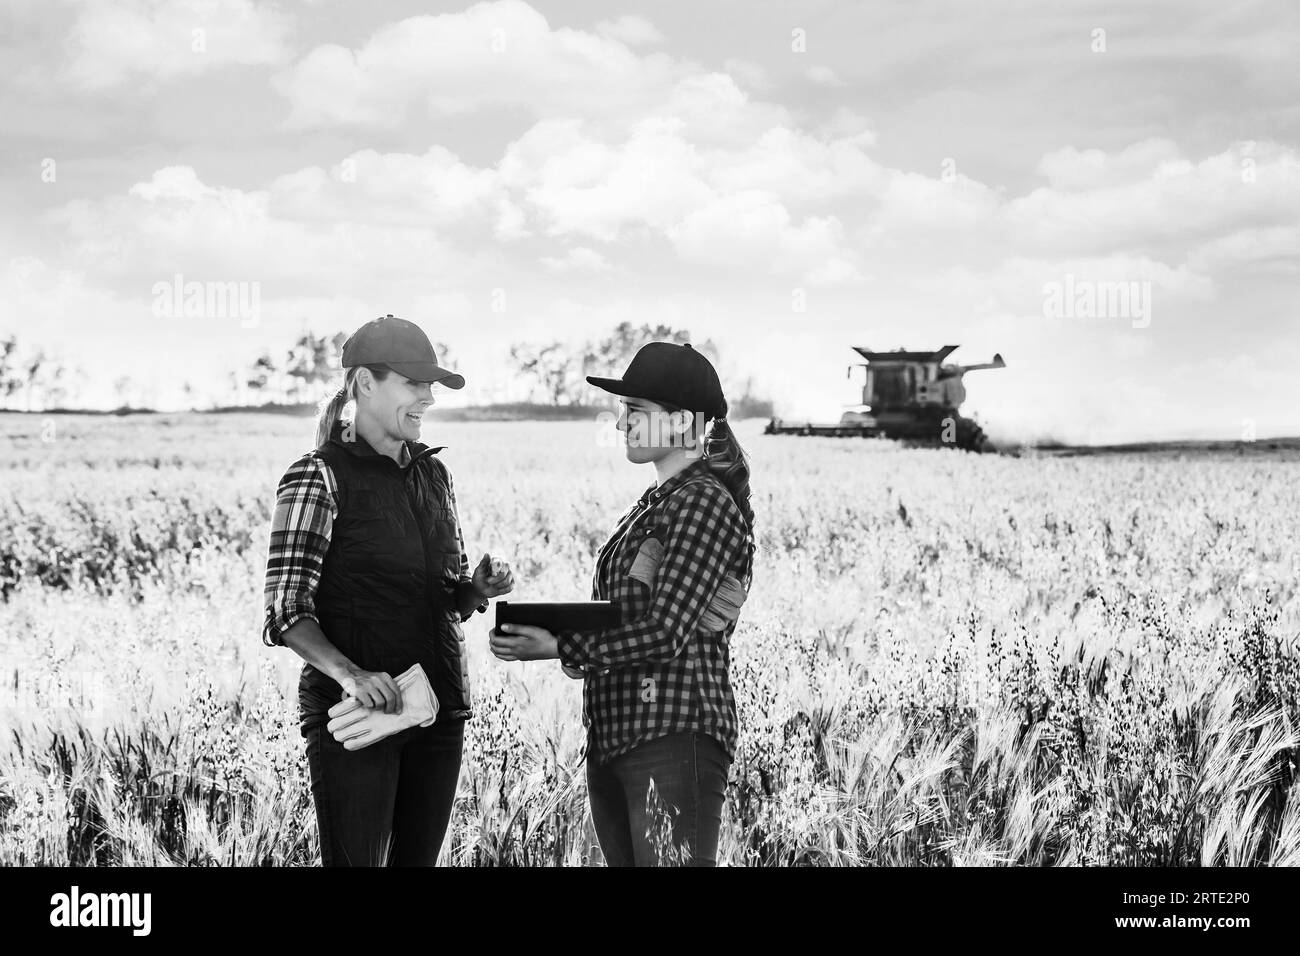 A mature farm woman standing in a field working together with a young woman at harvest time, using advanced agricultural software on a pad, with a ... Stock Photo